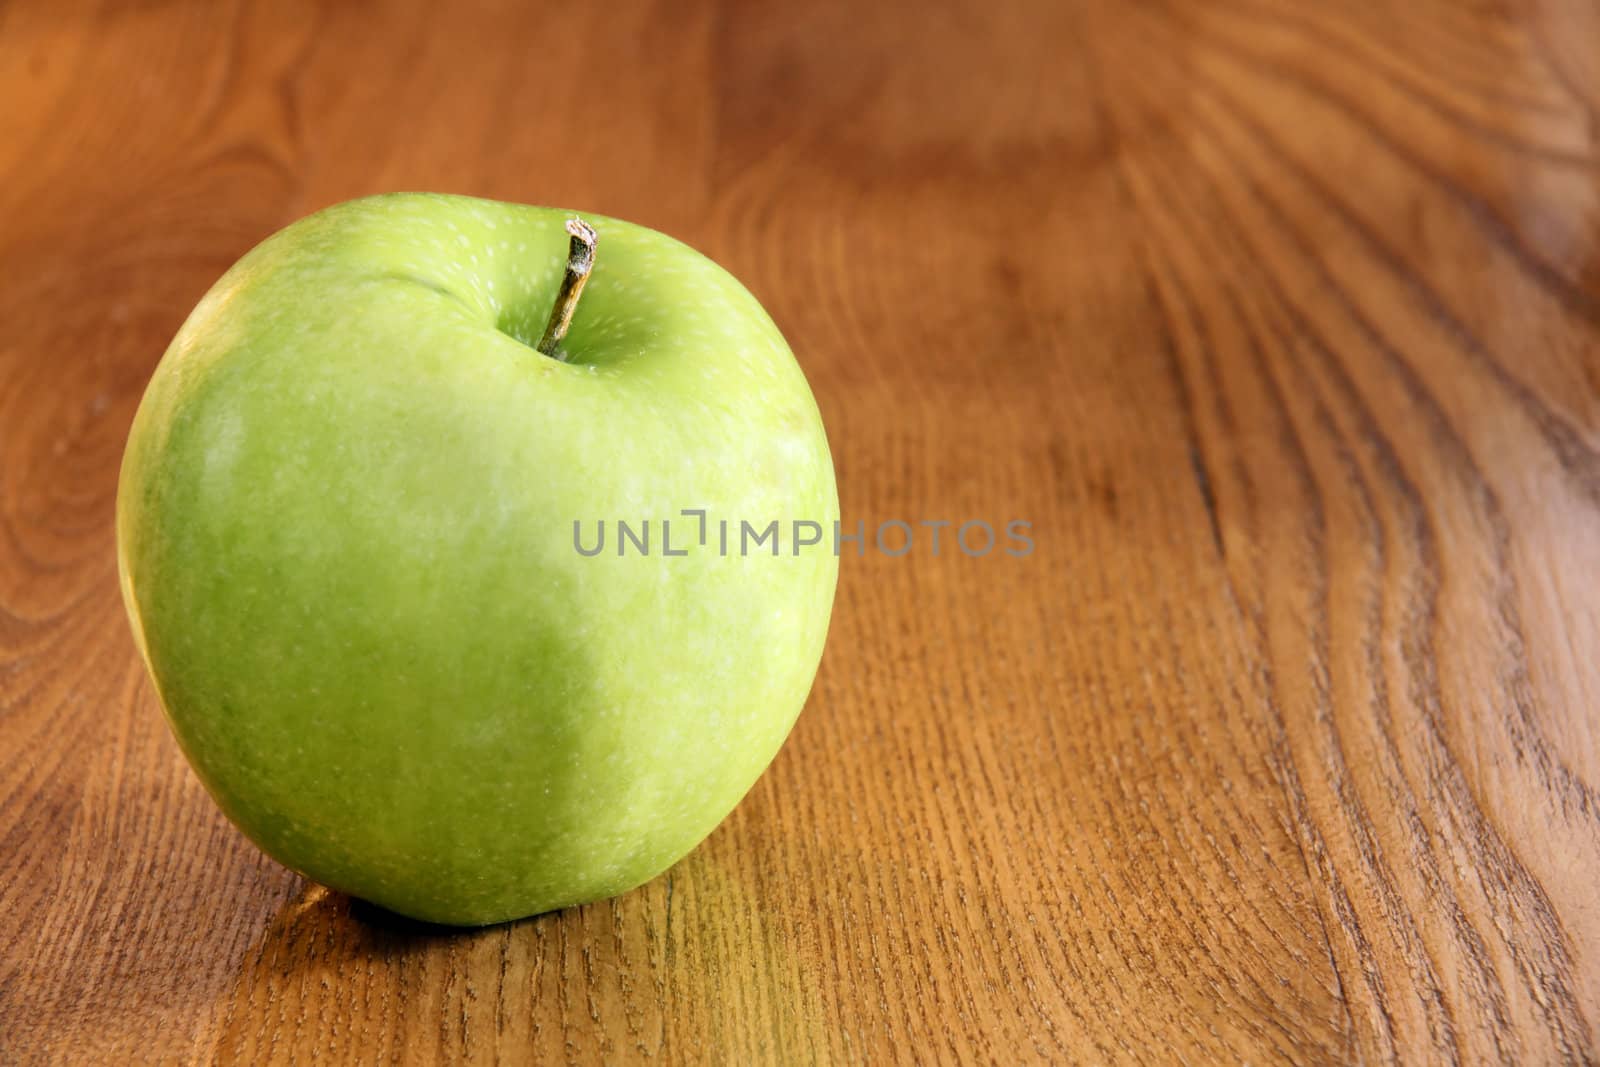 Healthy food: vibrant green granny smith apple on wooden kitchen table with copy space.